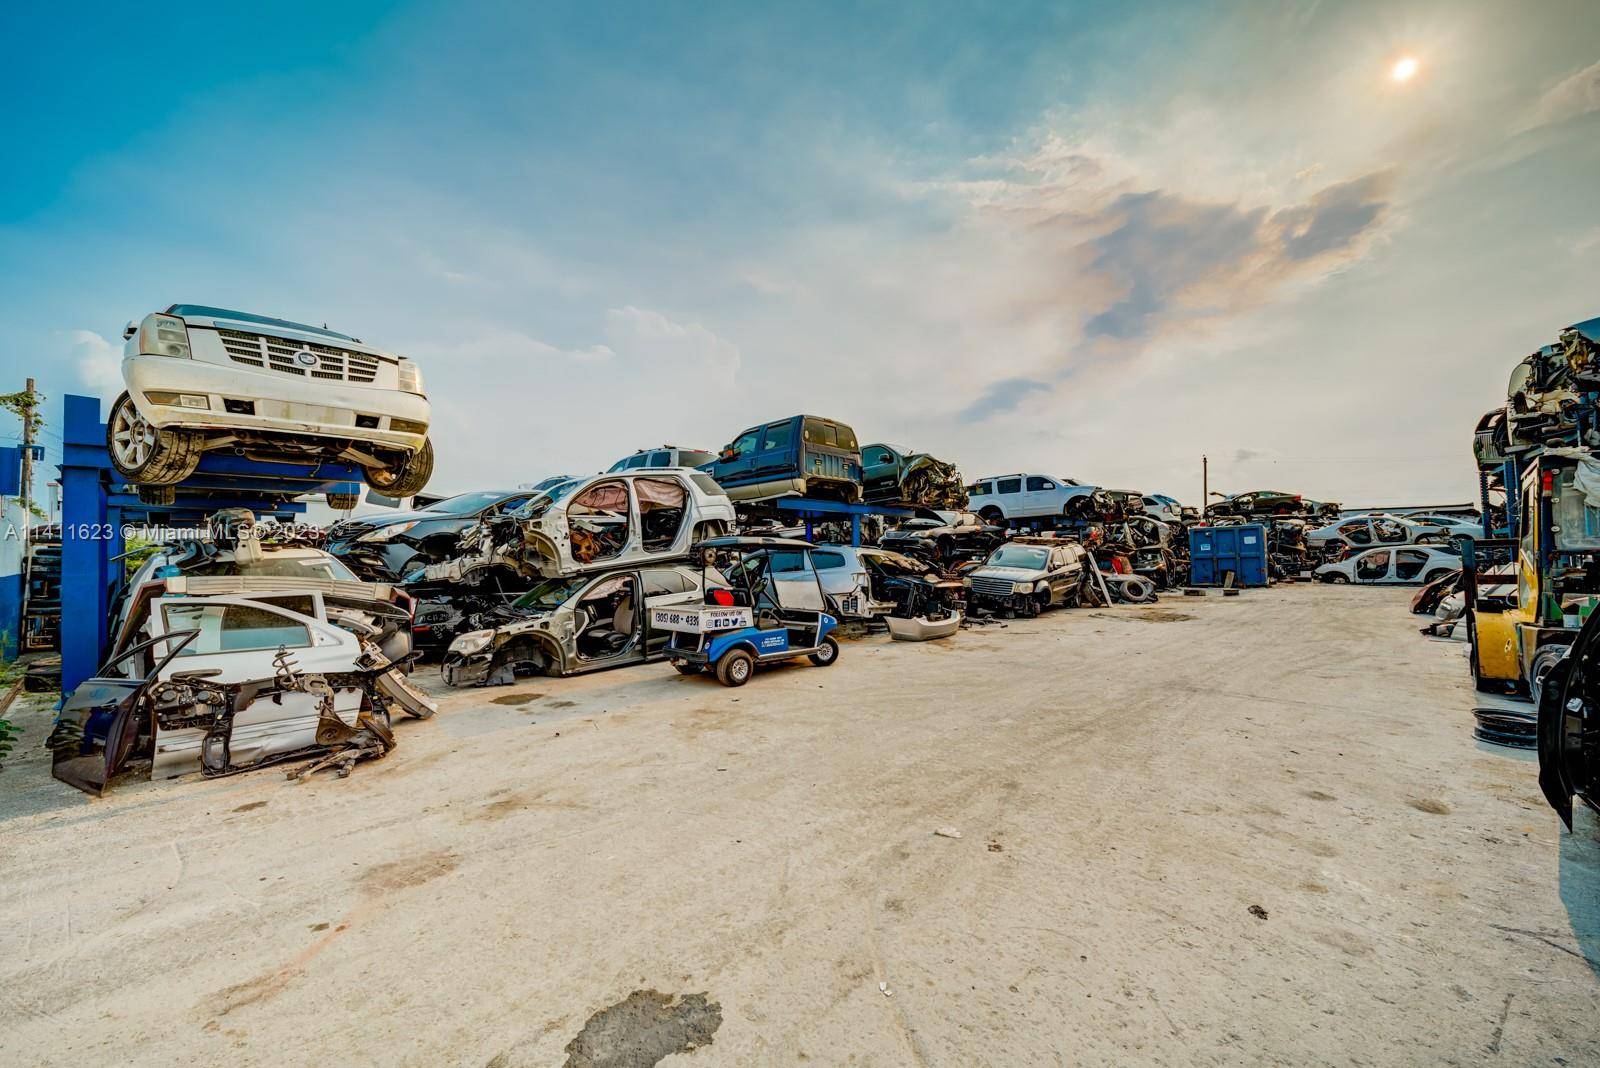 Two Junkyards for Sale with or without the Real Estate In Miami.